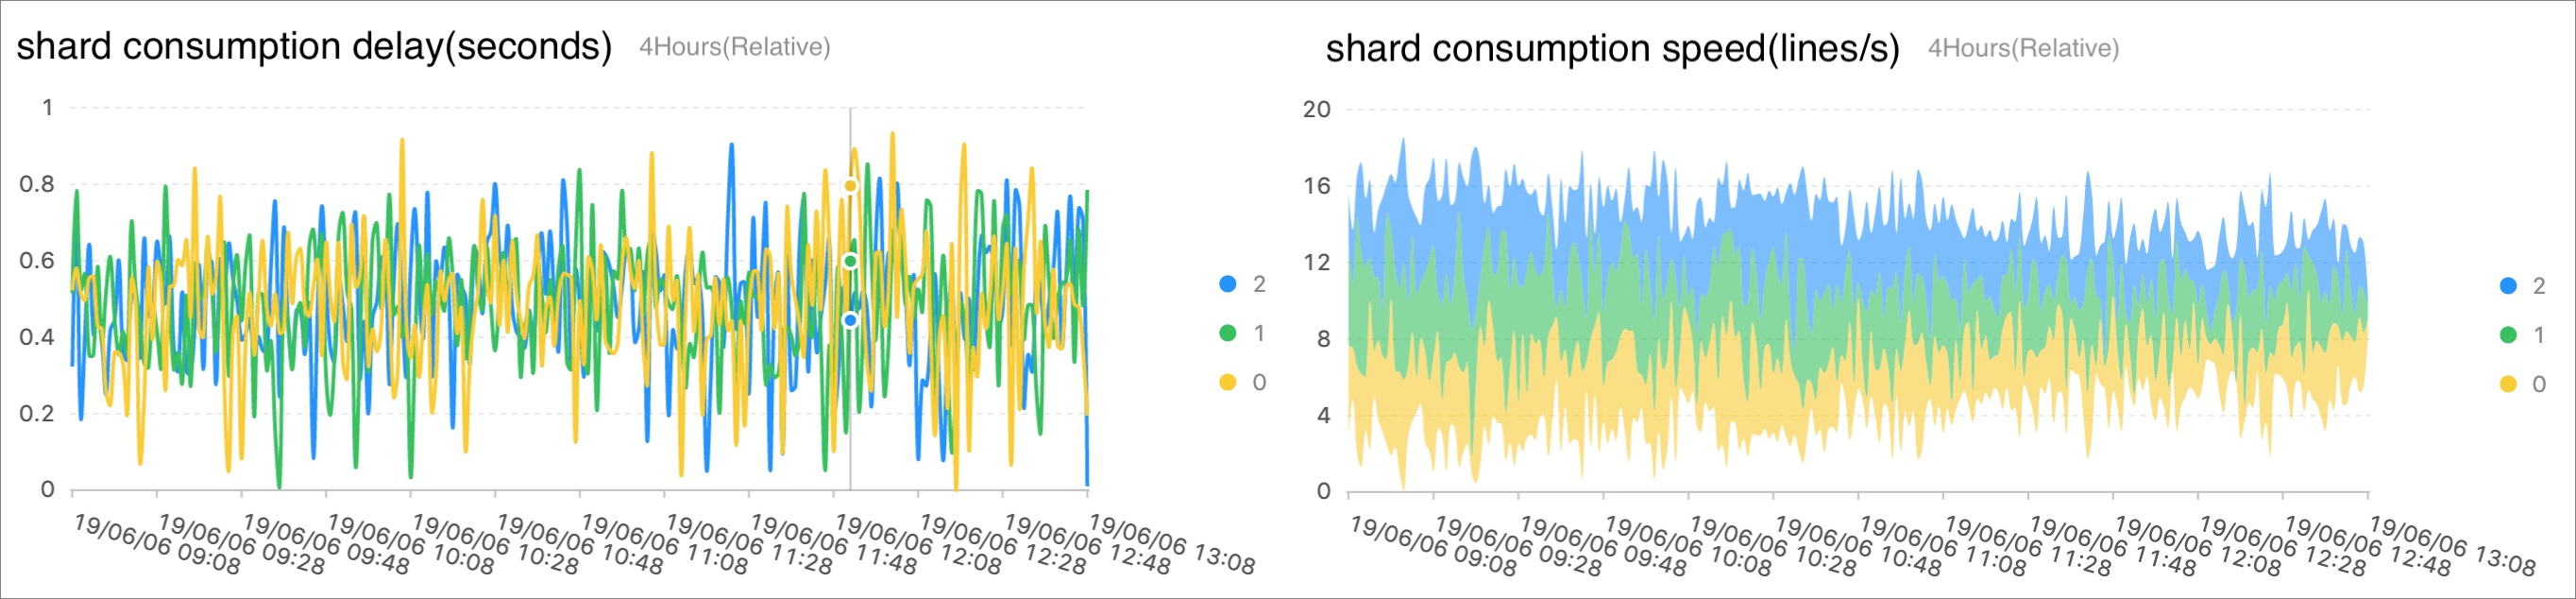 Shard consumption delay and shard consumption speed